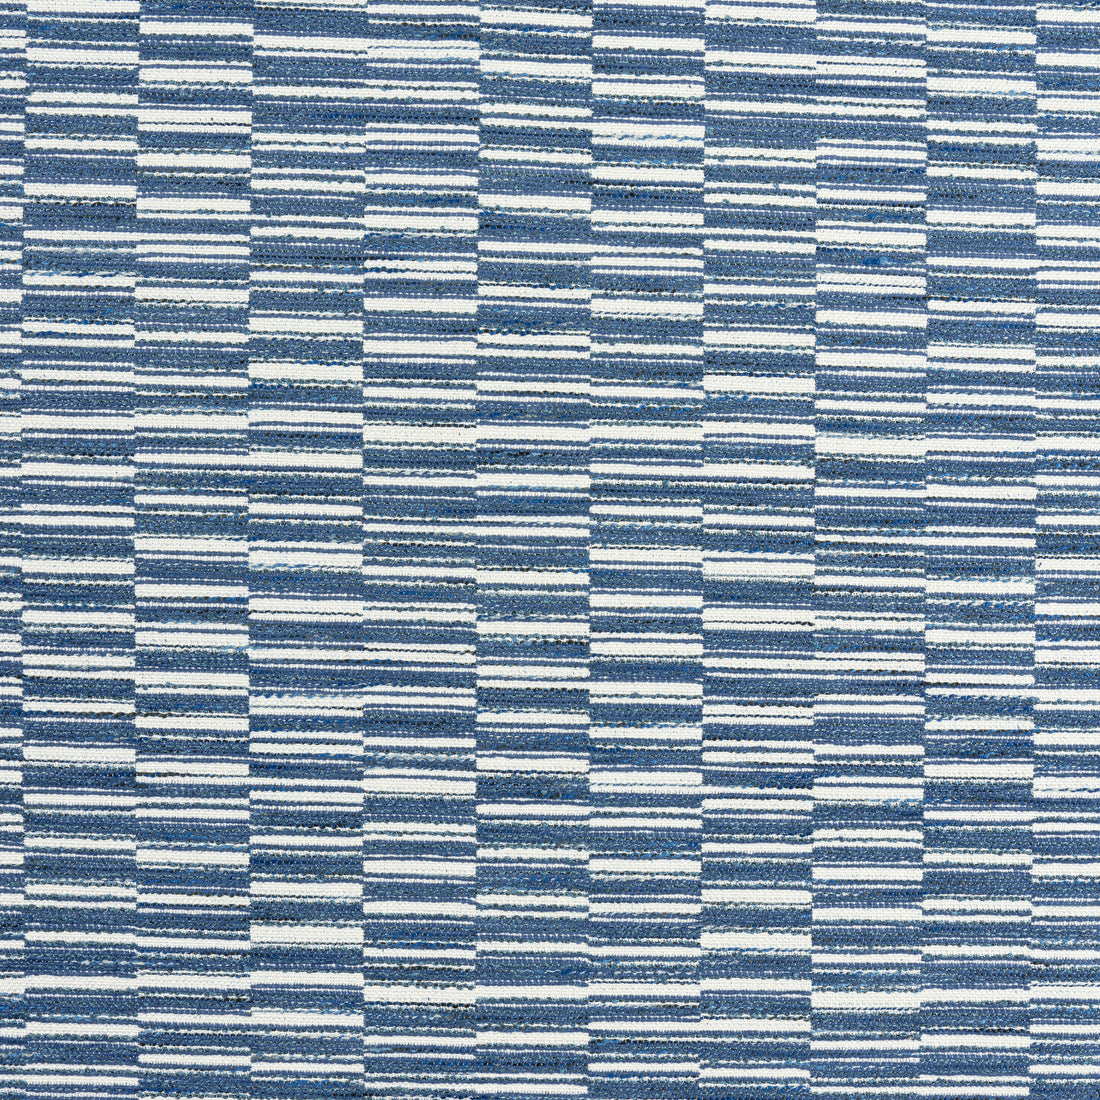 Legato fabric in indigo color - pattern number W8106 - by Thibaut in the Sereno collection